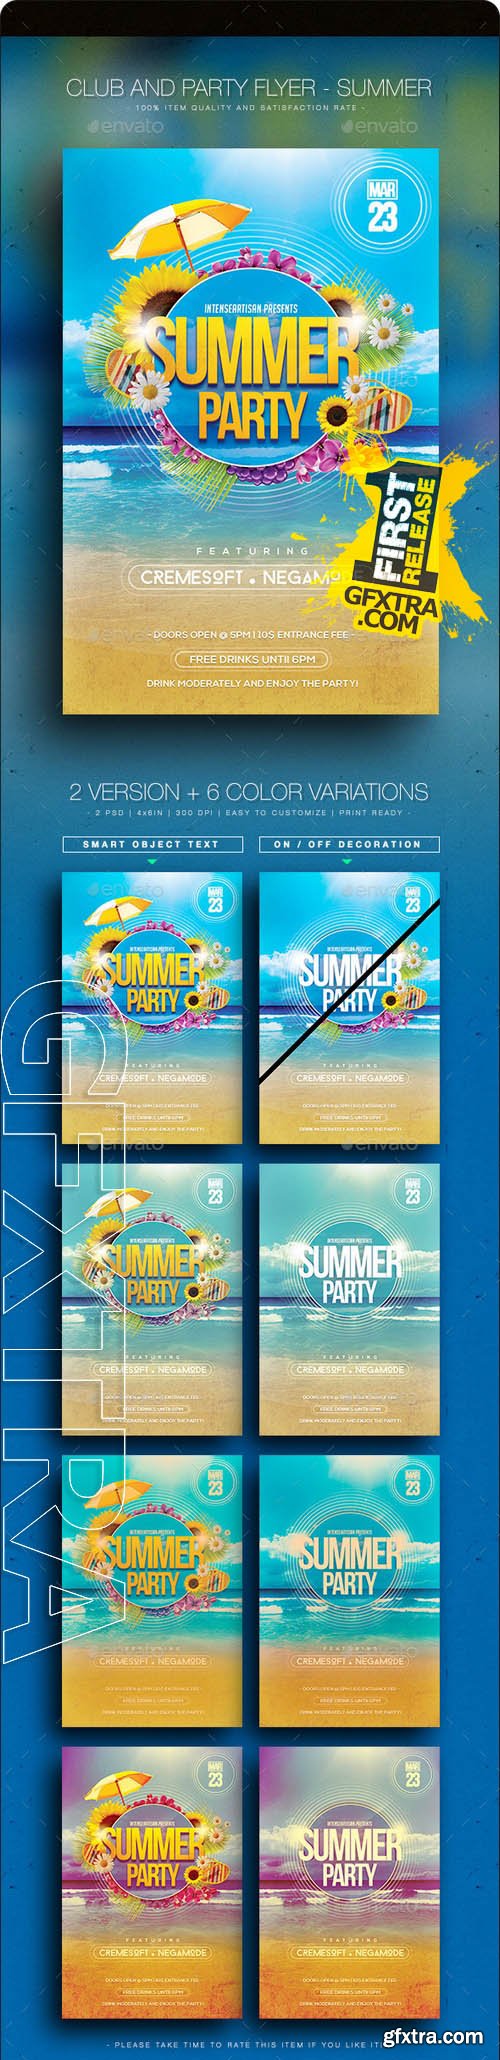 Summer V.2 - Club And Party Flyer - Graphicriver 10806161